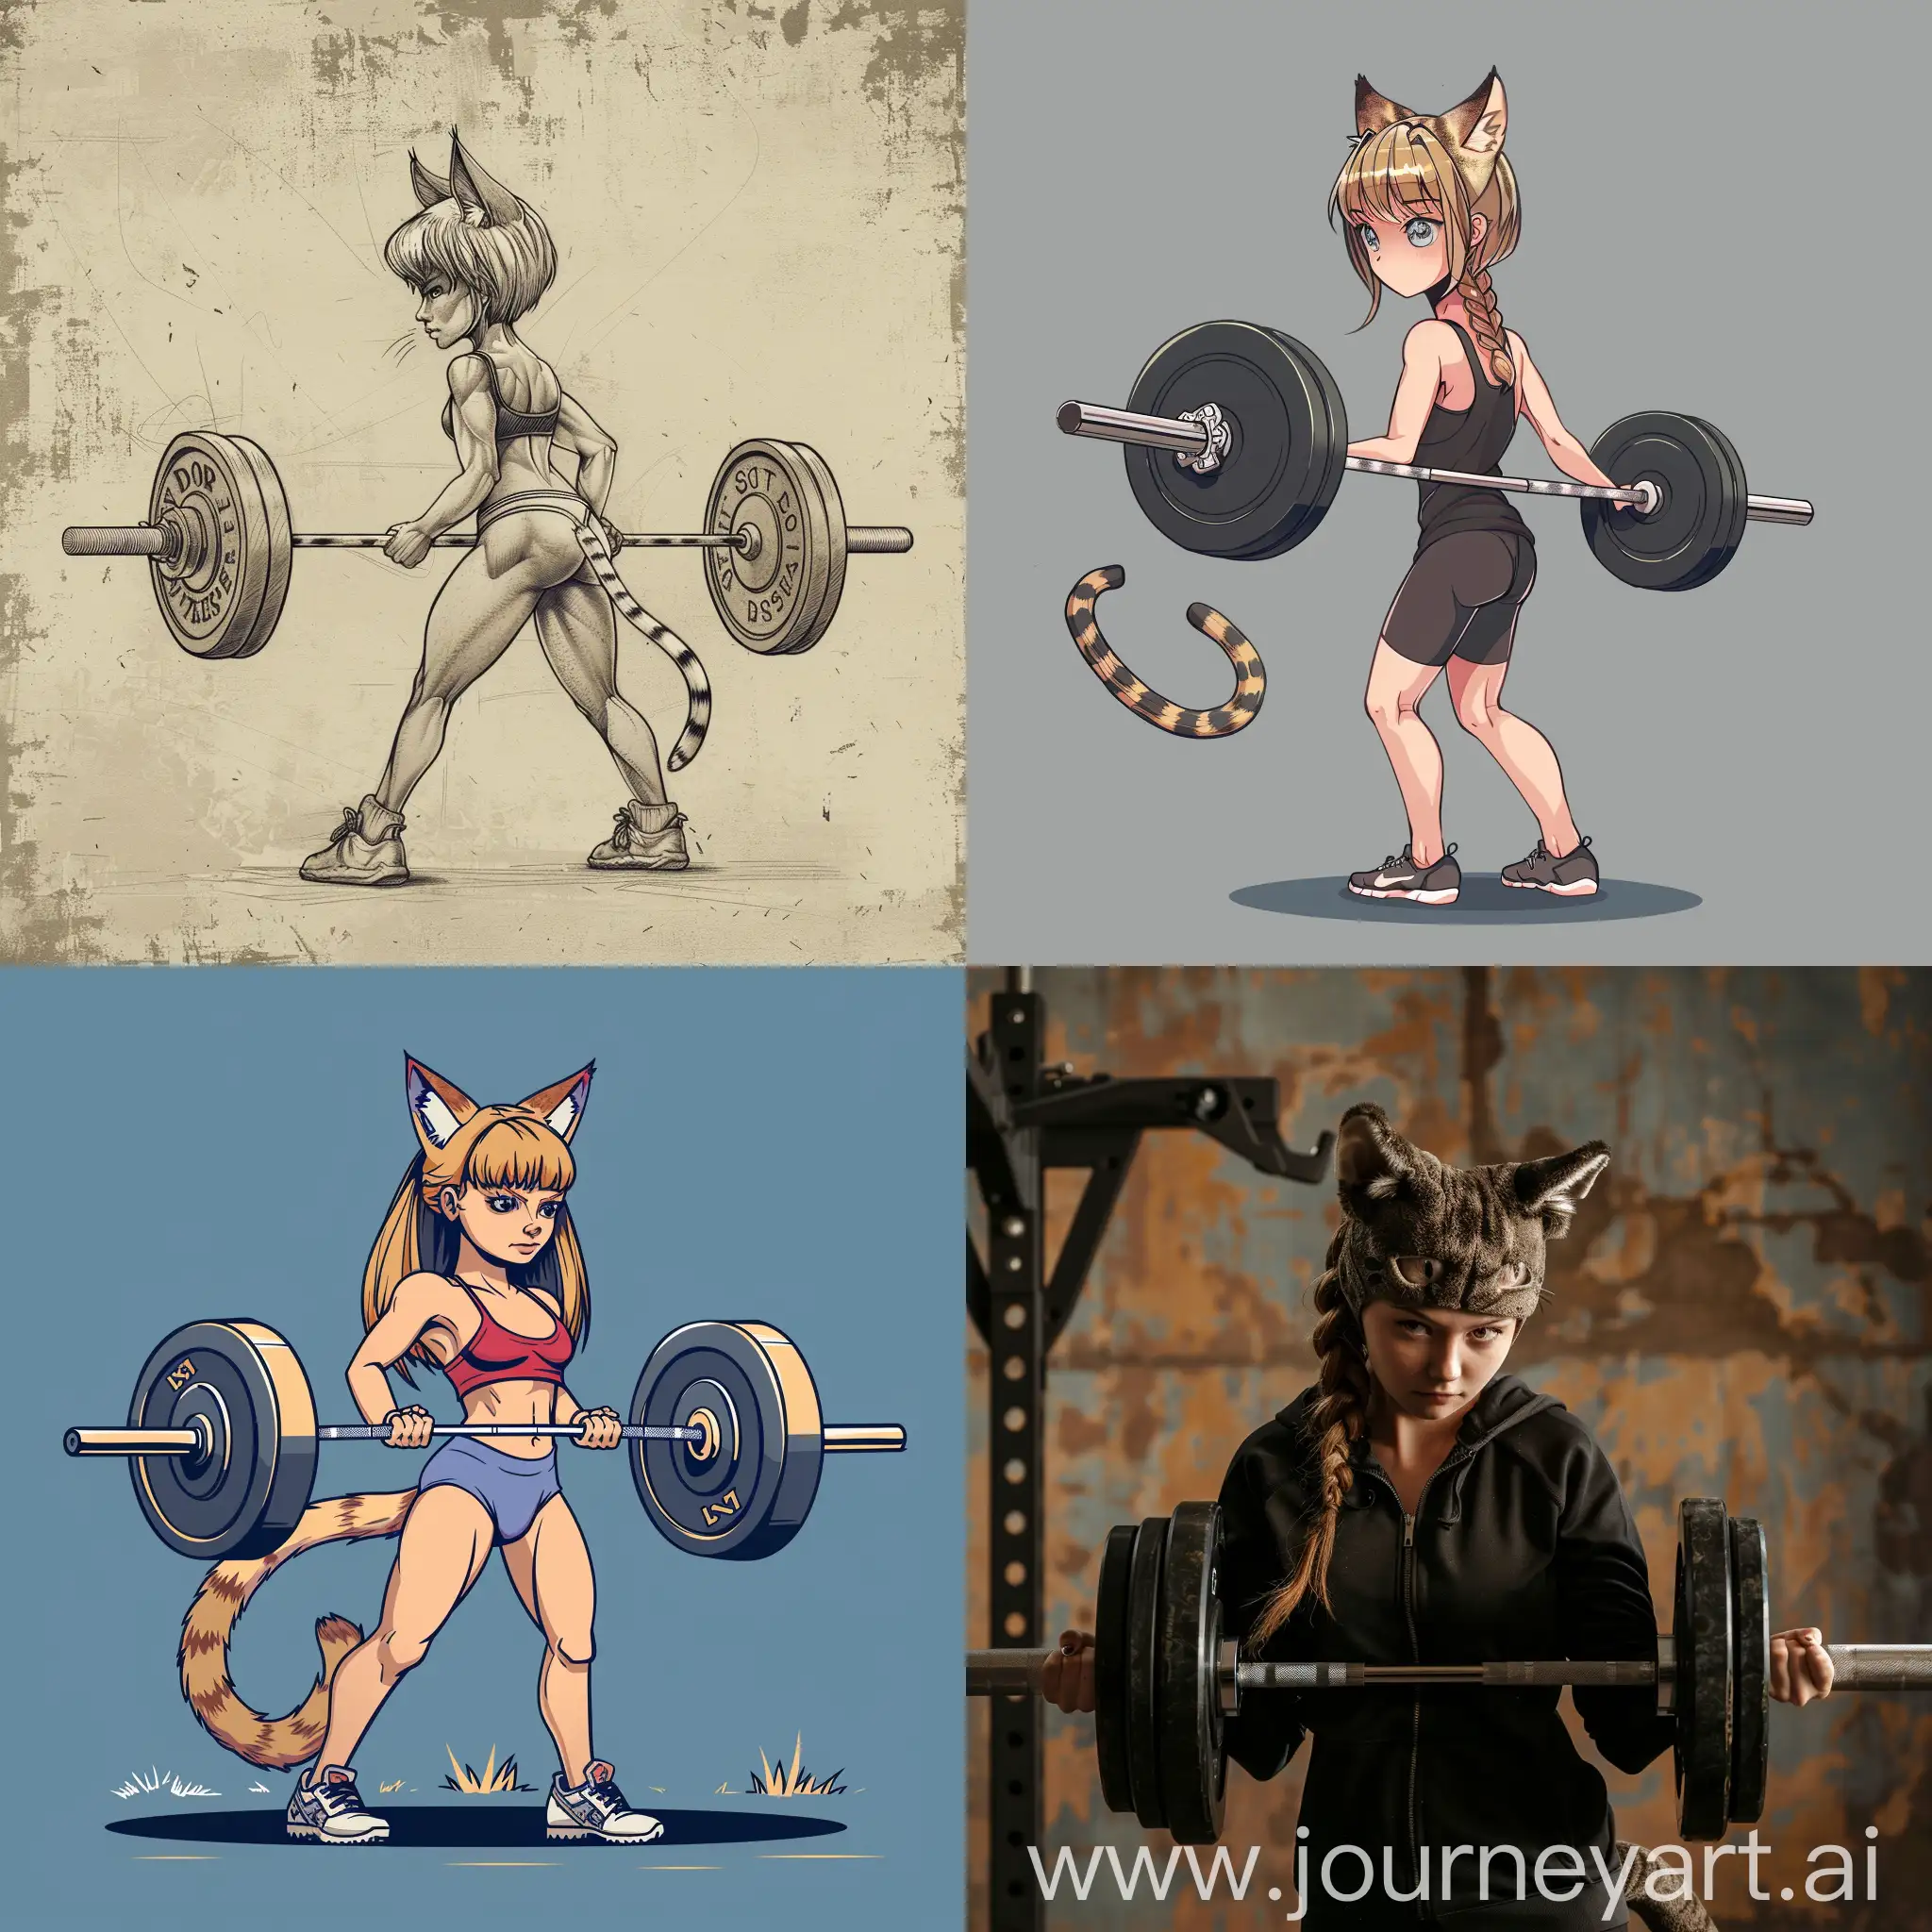 Slender-Girl-with-Cat-Ears-and-Tail-Performing-Romanian-Deadlift-Exercise